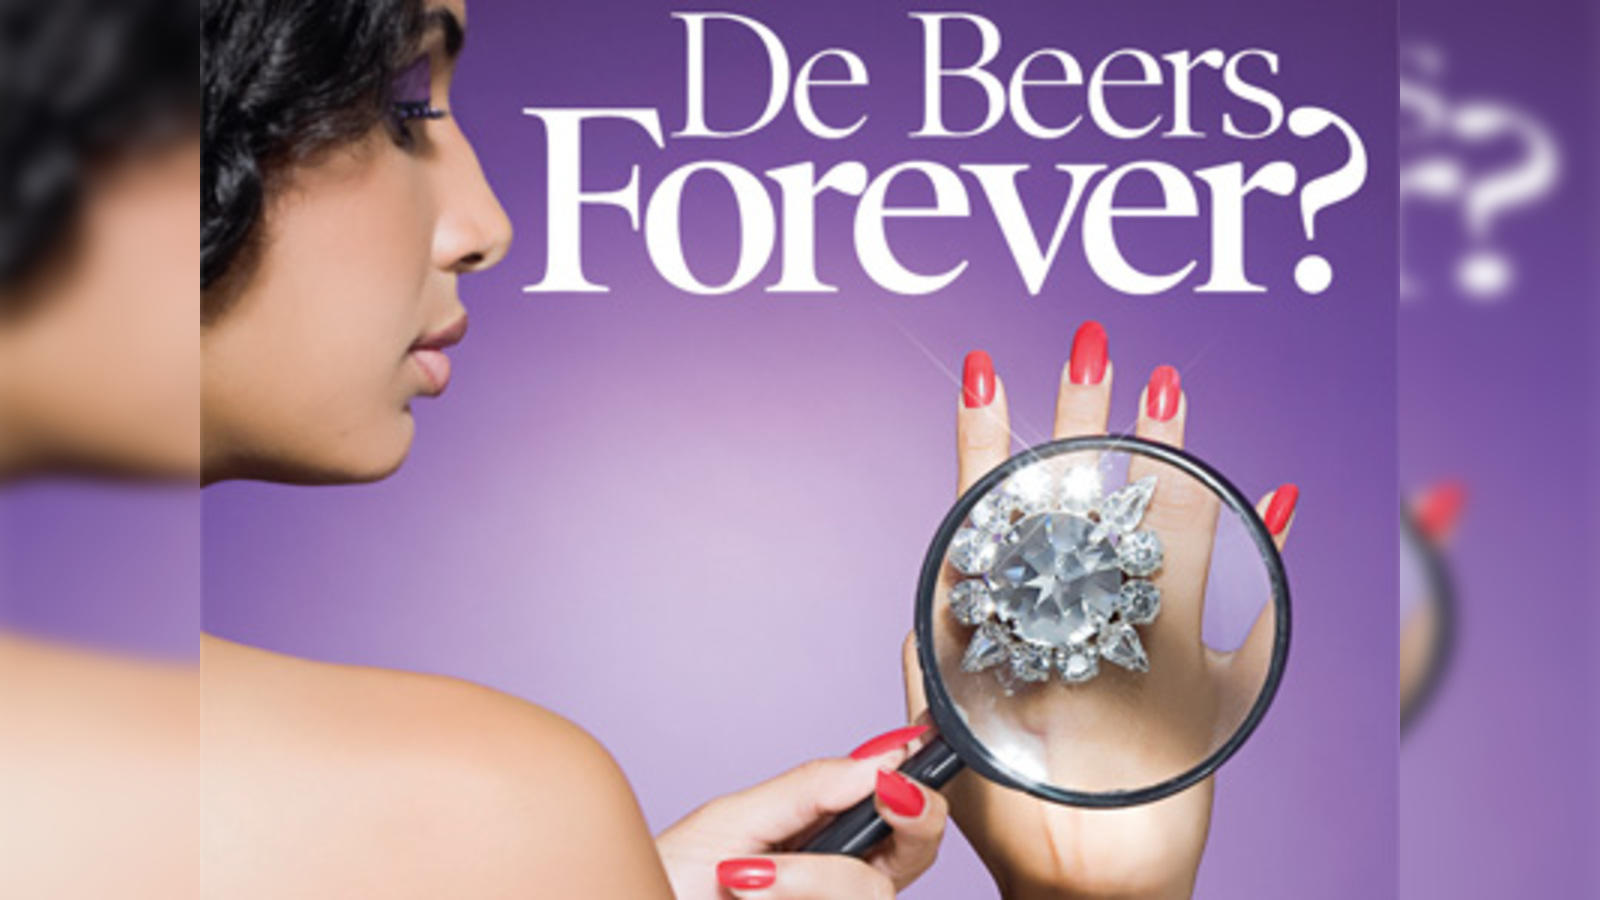 De Beers S.A., Diamond Mining & Trading Giant